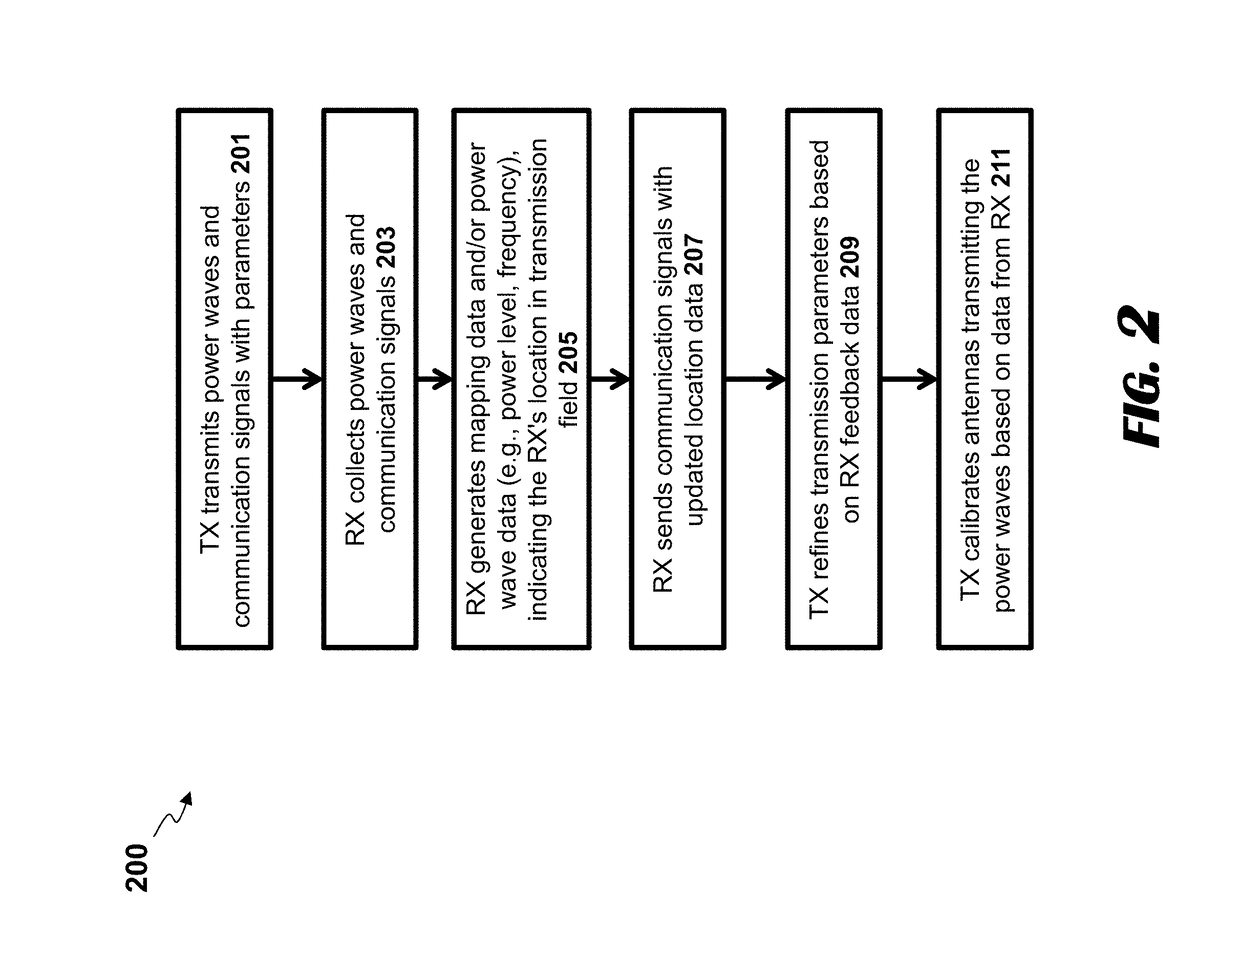 Systems and methods for identifying receivers in a transmission field by transmitting exploratory power waves towards different segments of a transmission field